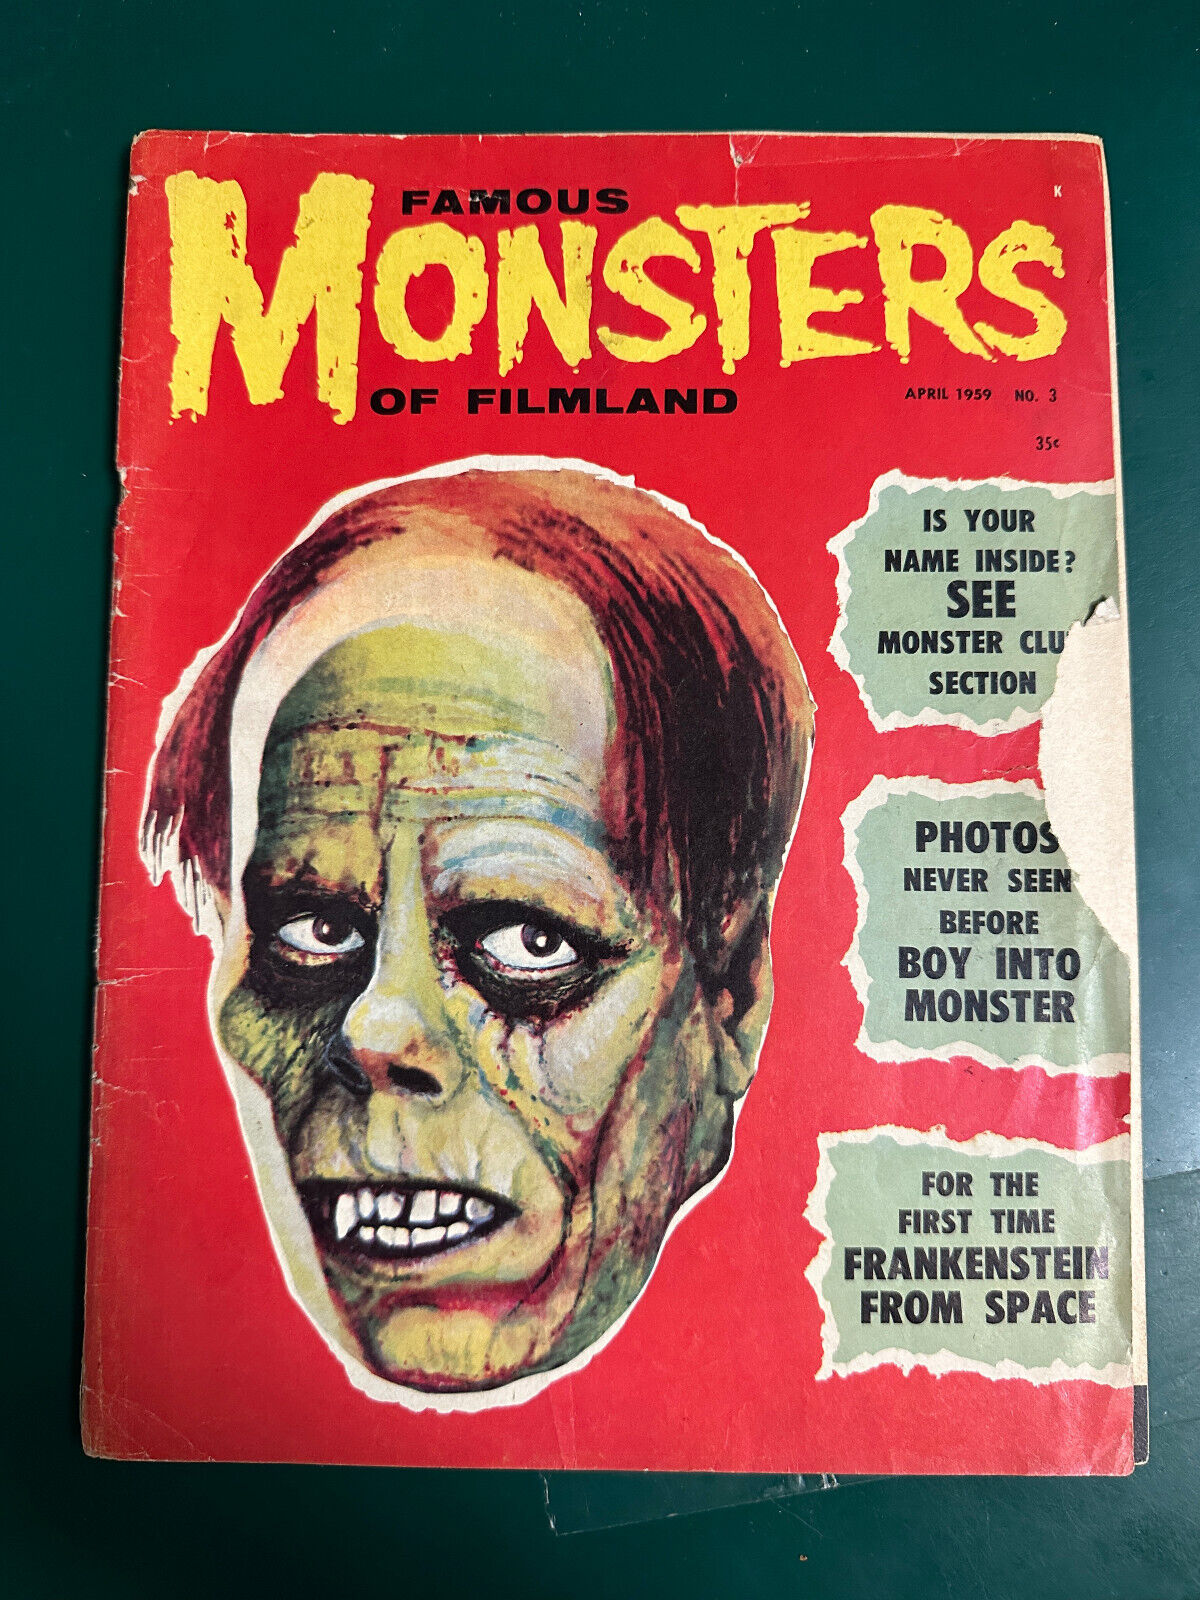 Famous Monsters of Filmland No. 3 1959